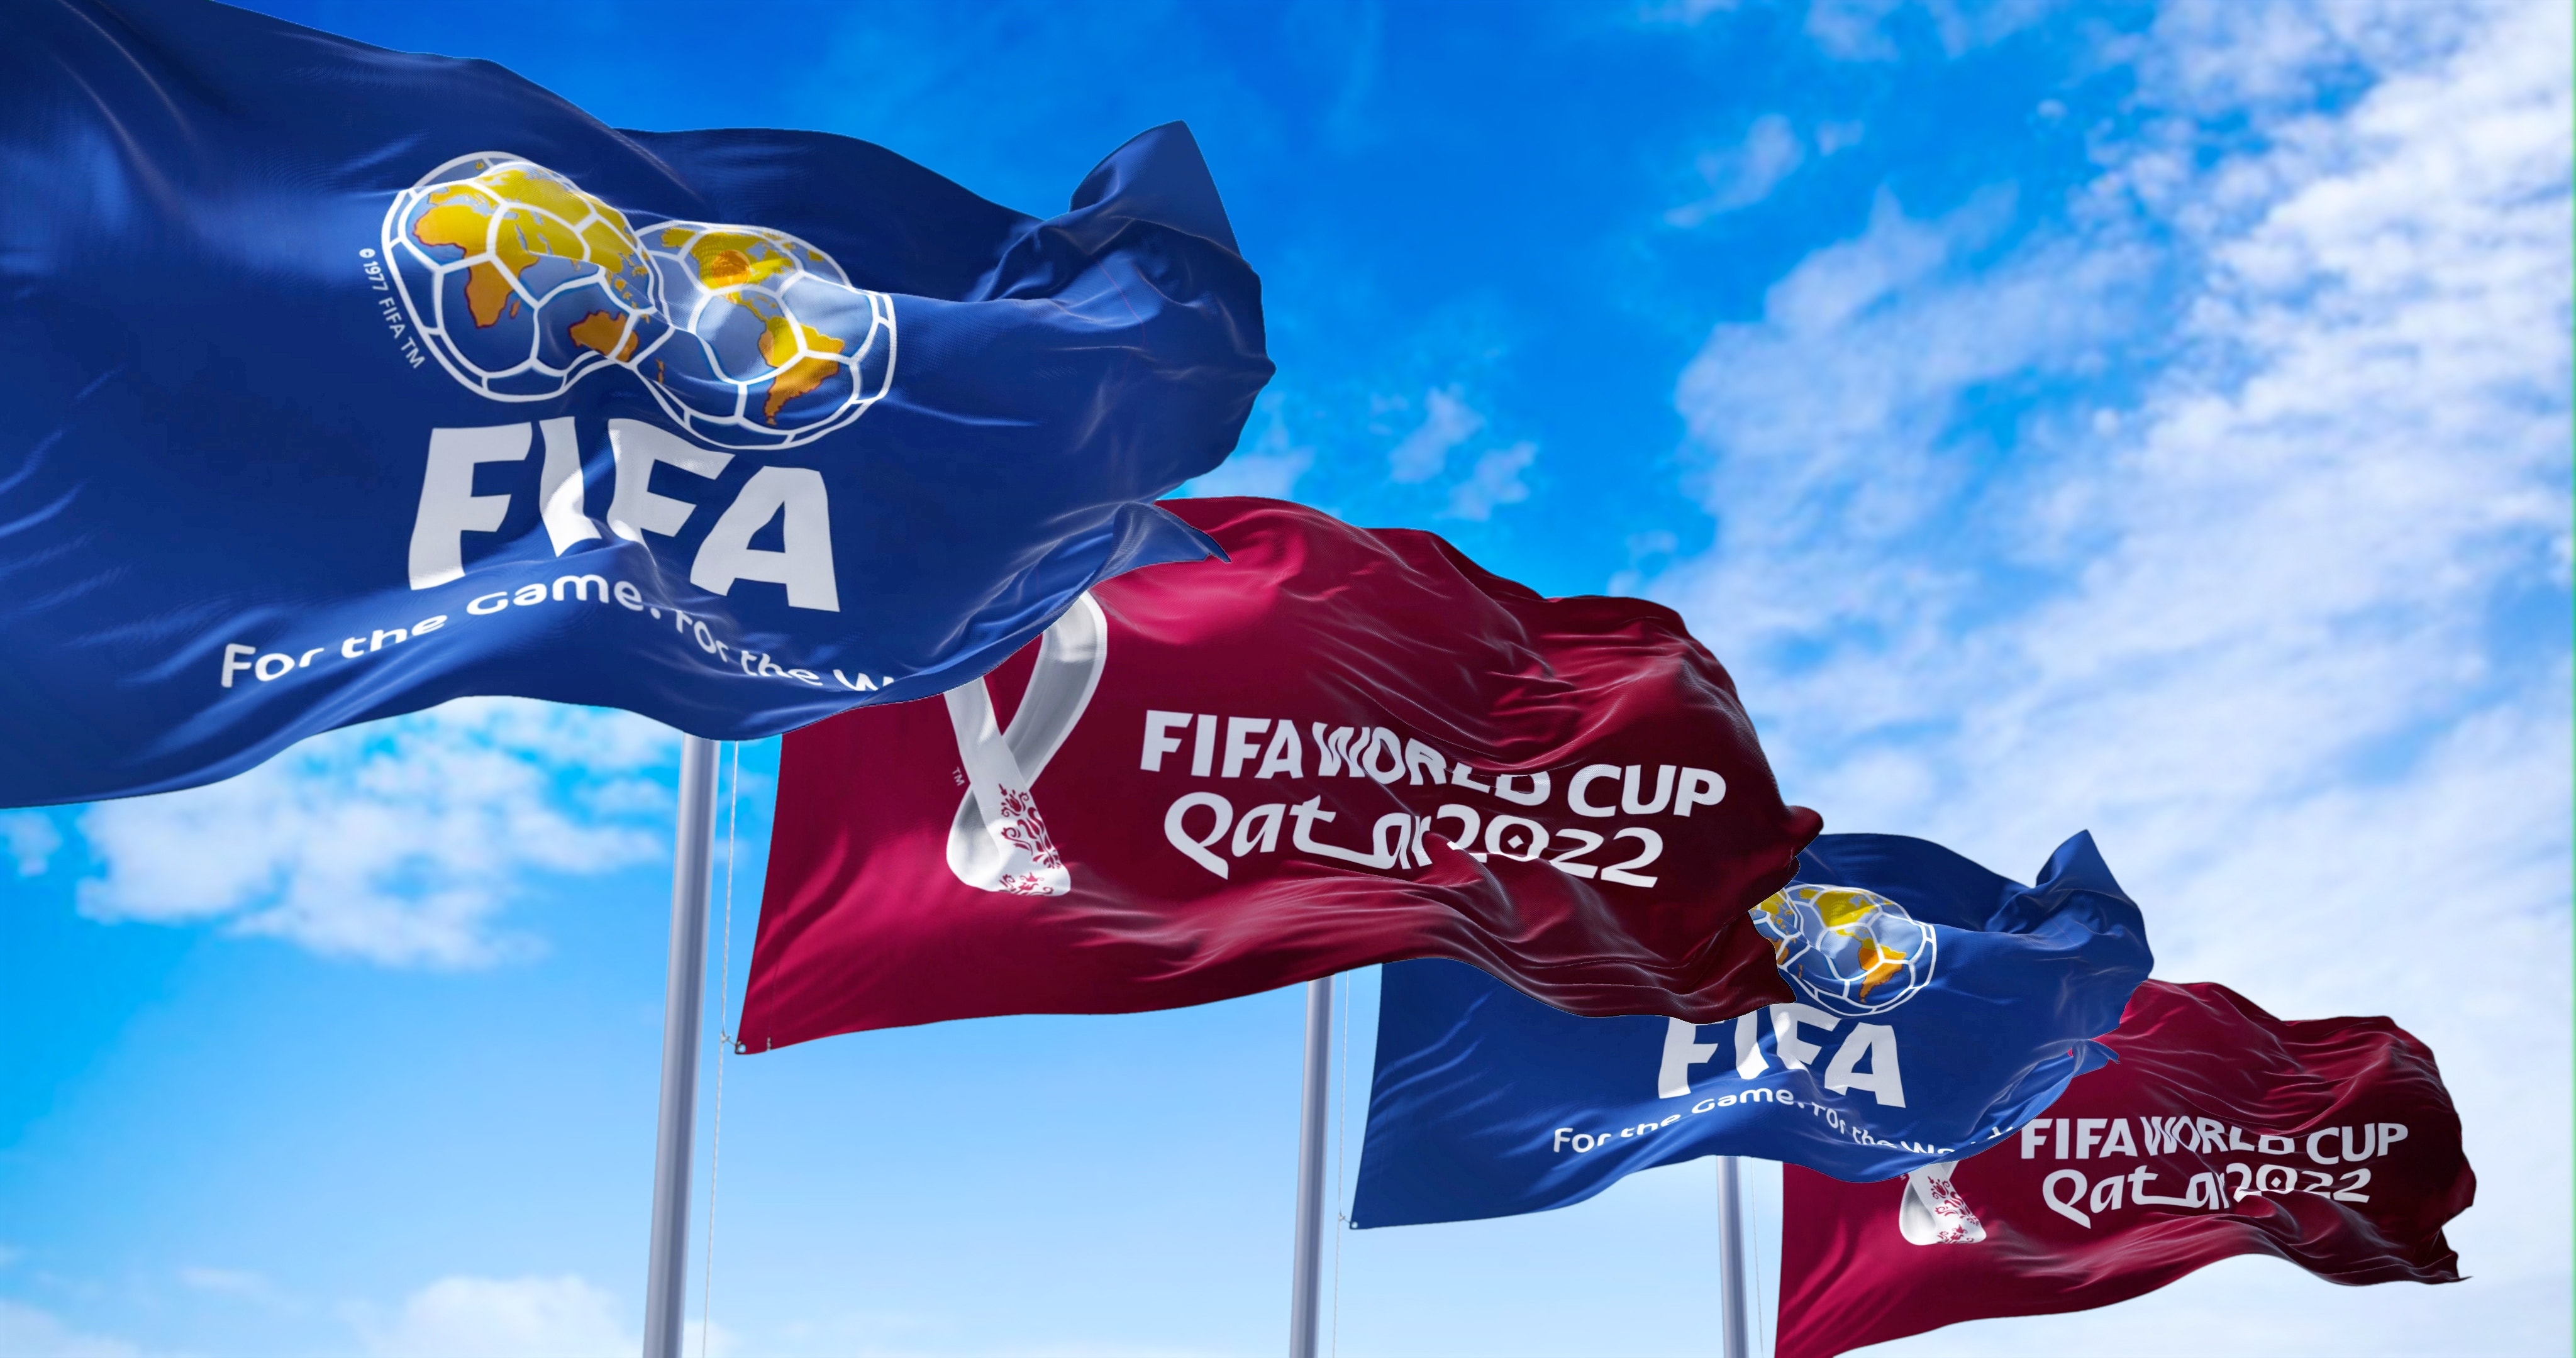 Visa Partners With This Major Crypto Exchange To Launch NFT Collection Ahead Of FIFA World Cup 2022